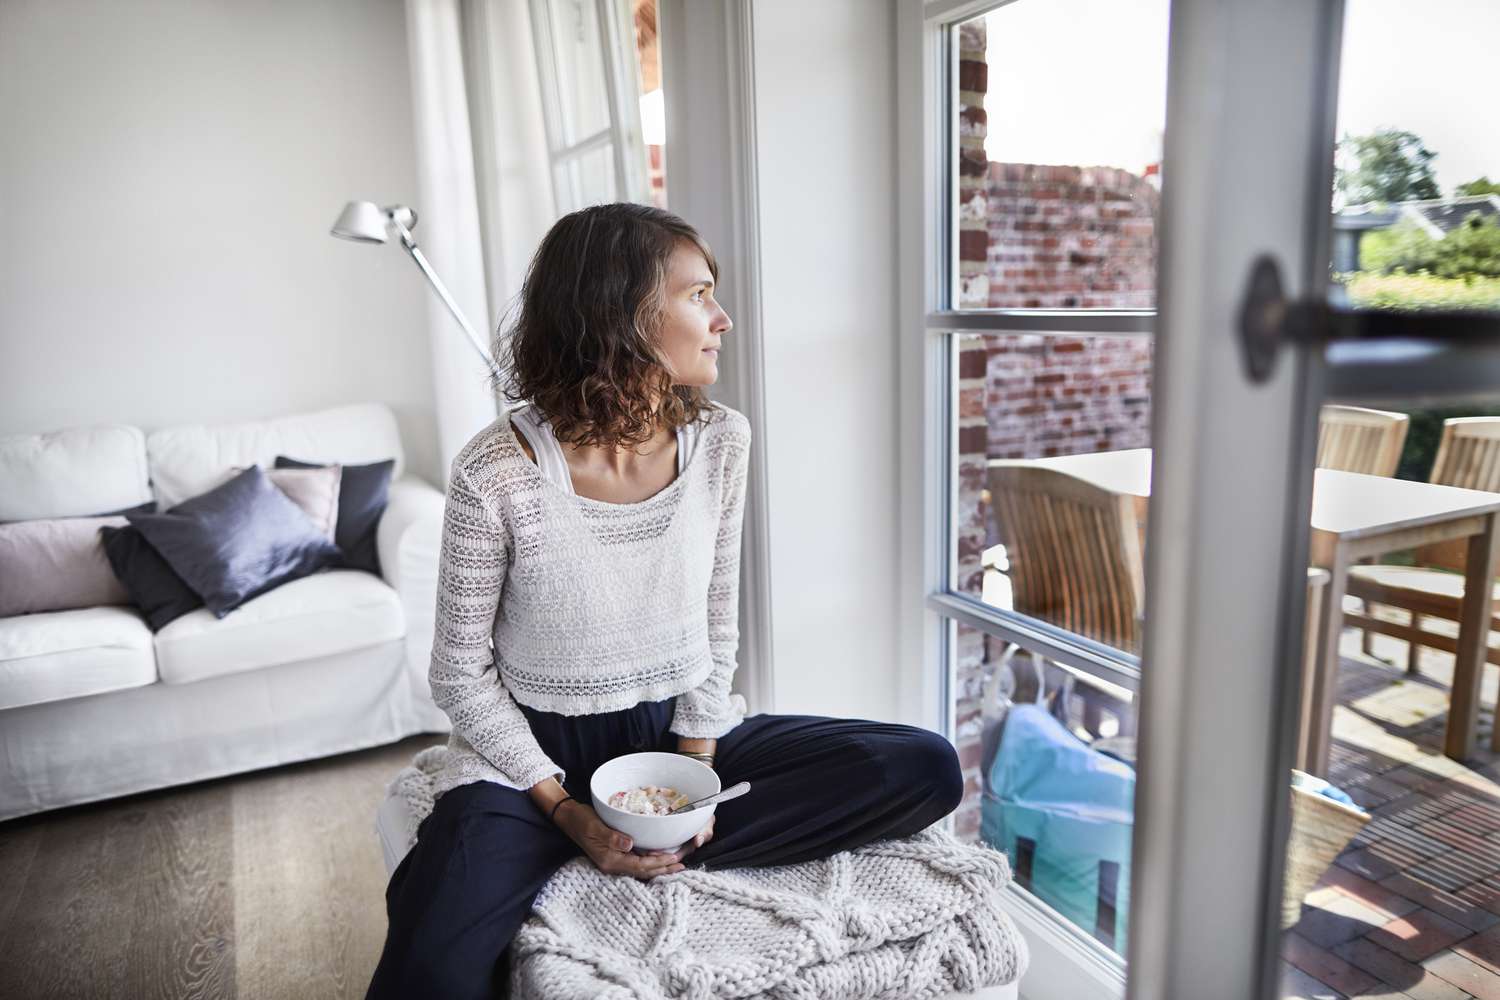 Woman looking out the window as she eats her breakfast